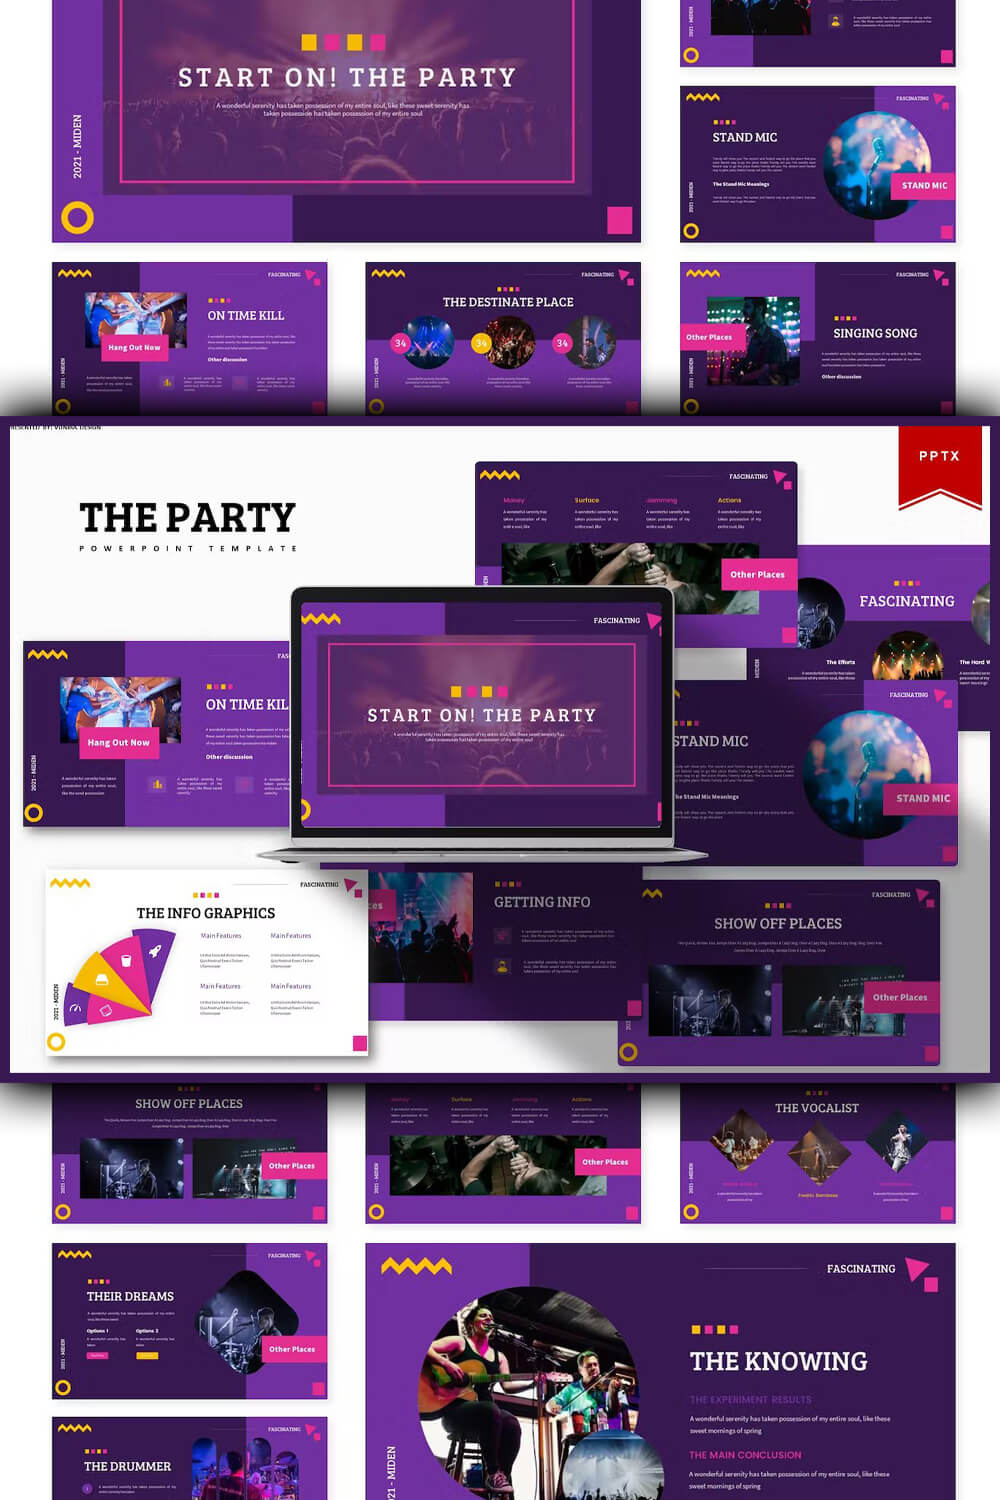 The infographics of the party powerpoint template.